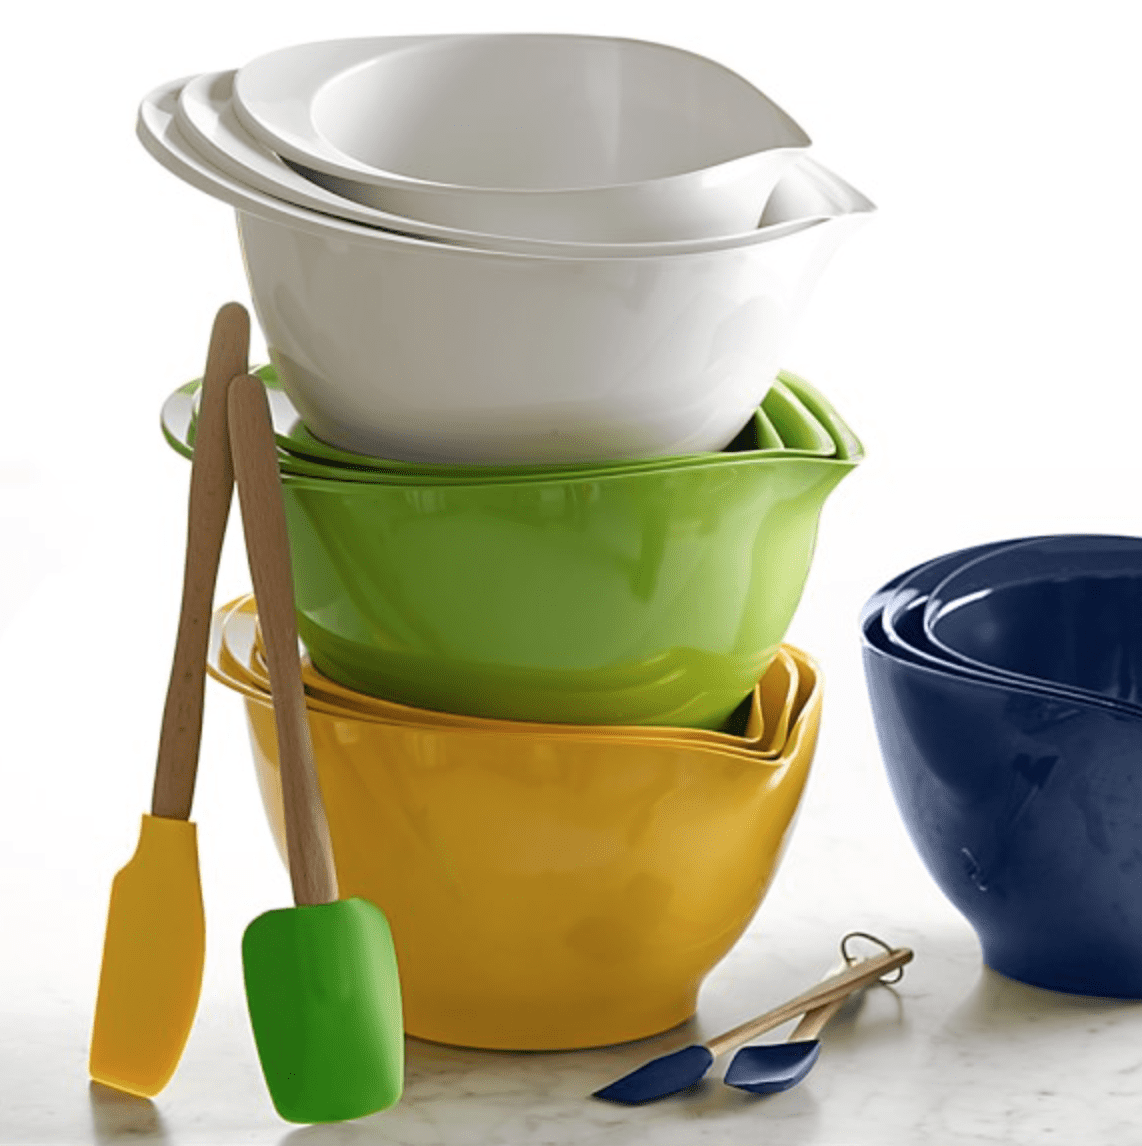 Non-Slip Mixing Bowl - For Small Hands